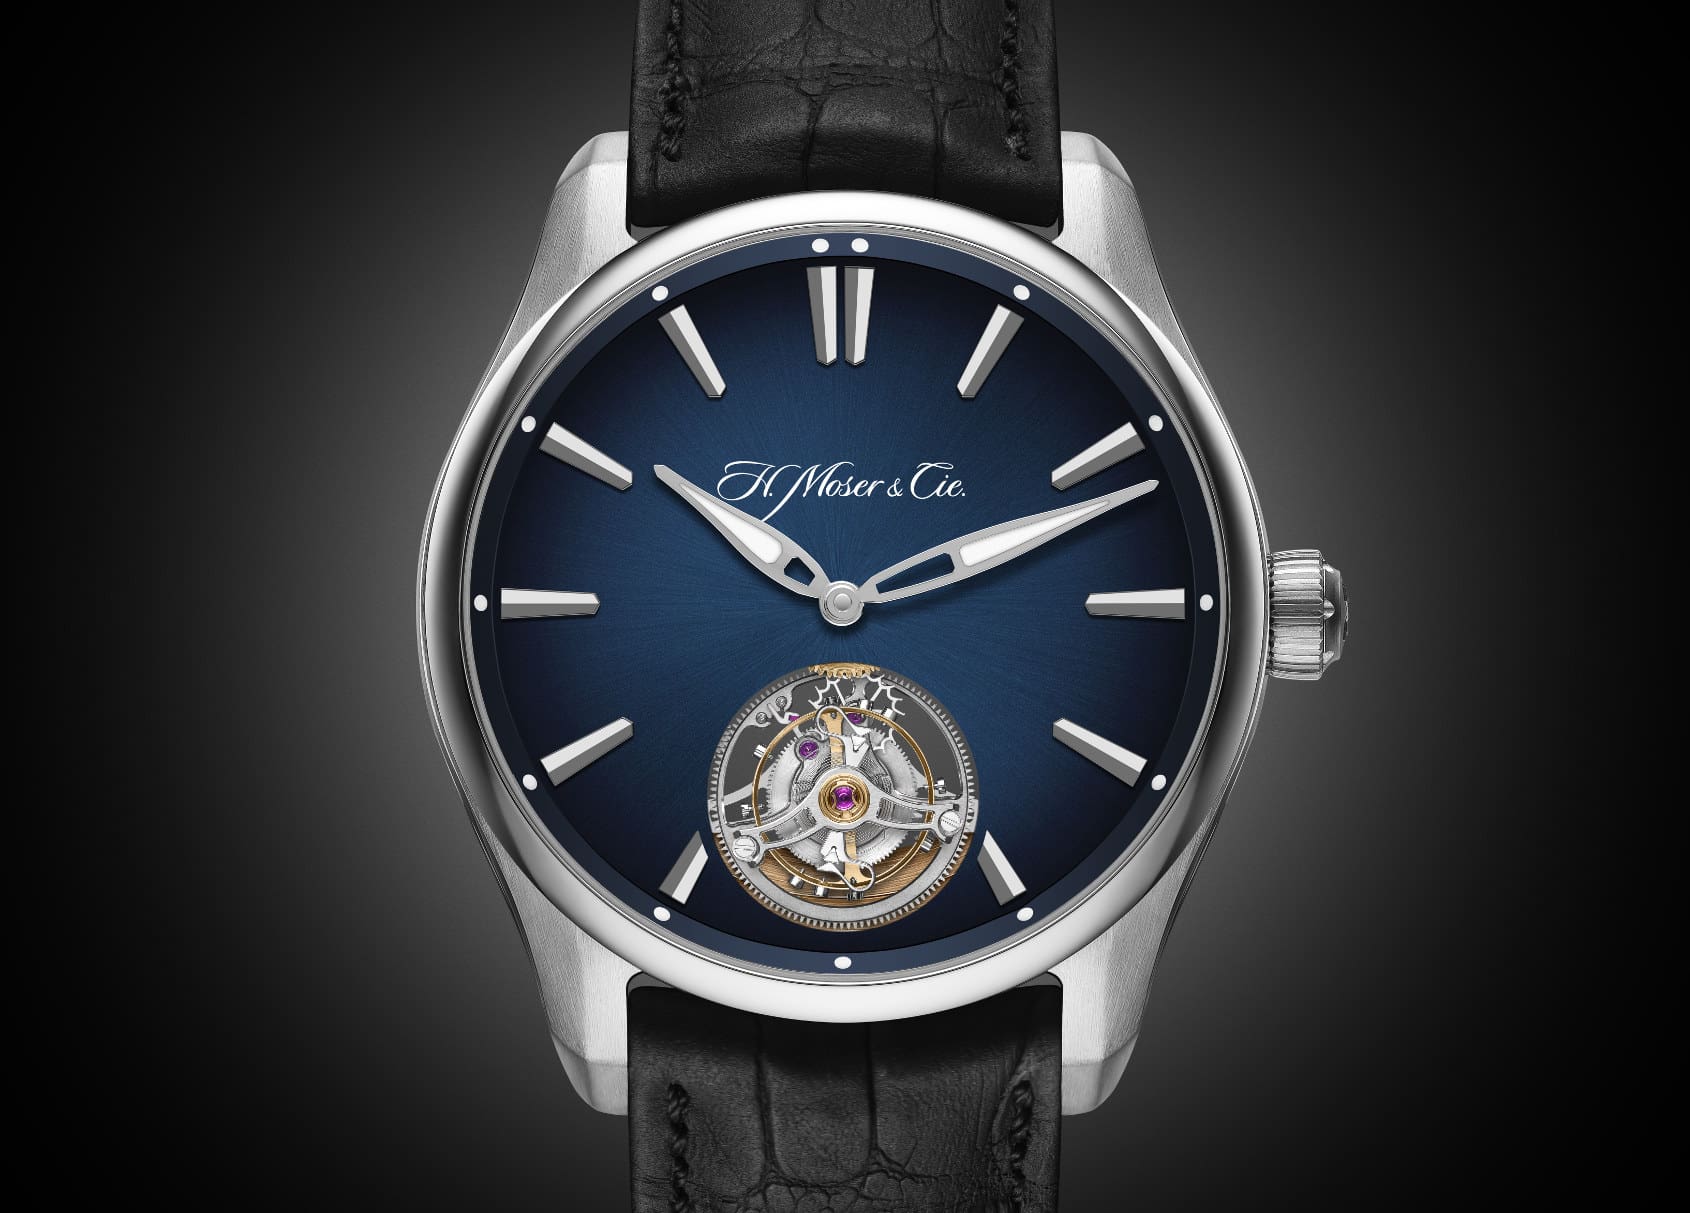 INTRODUCING: A tourbillon for your every day – the Moser Pioneer Tourbillon